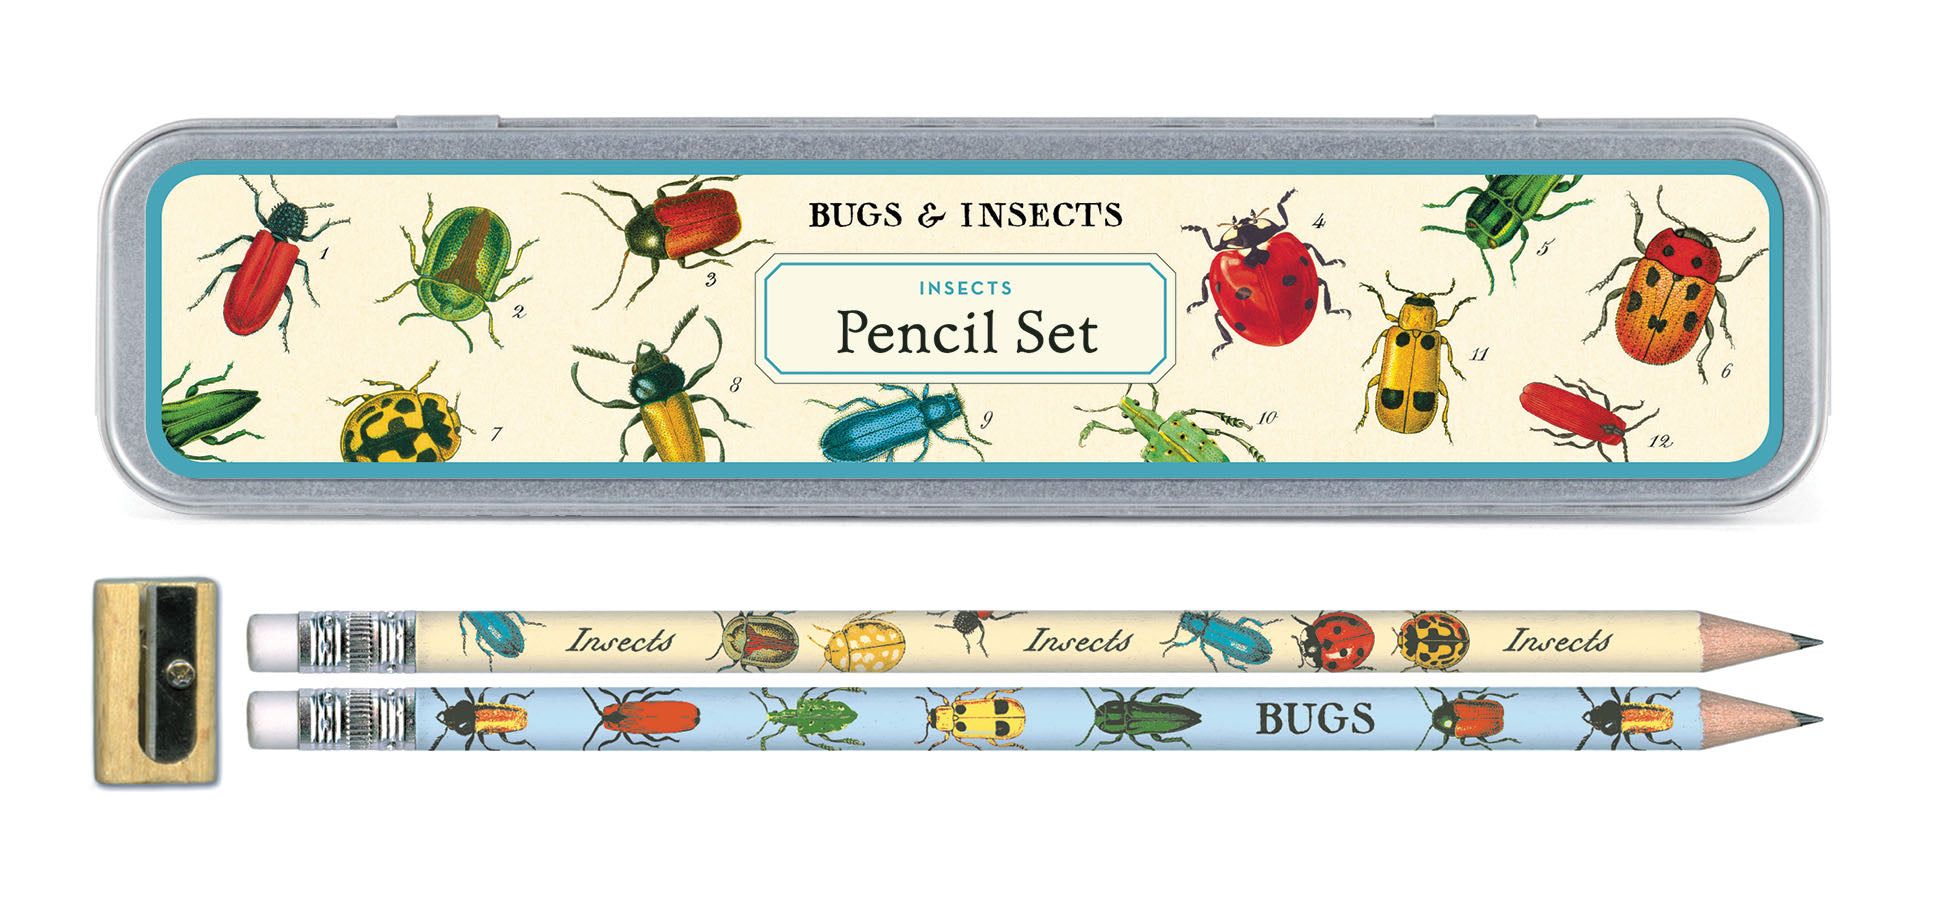 Cavallini & Co. Bugs & Insects Pencil Set